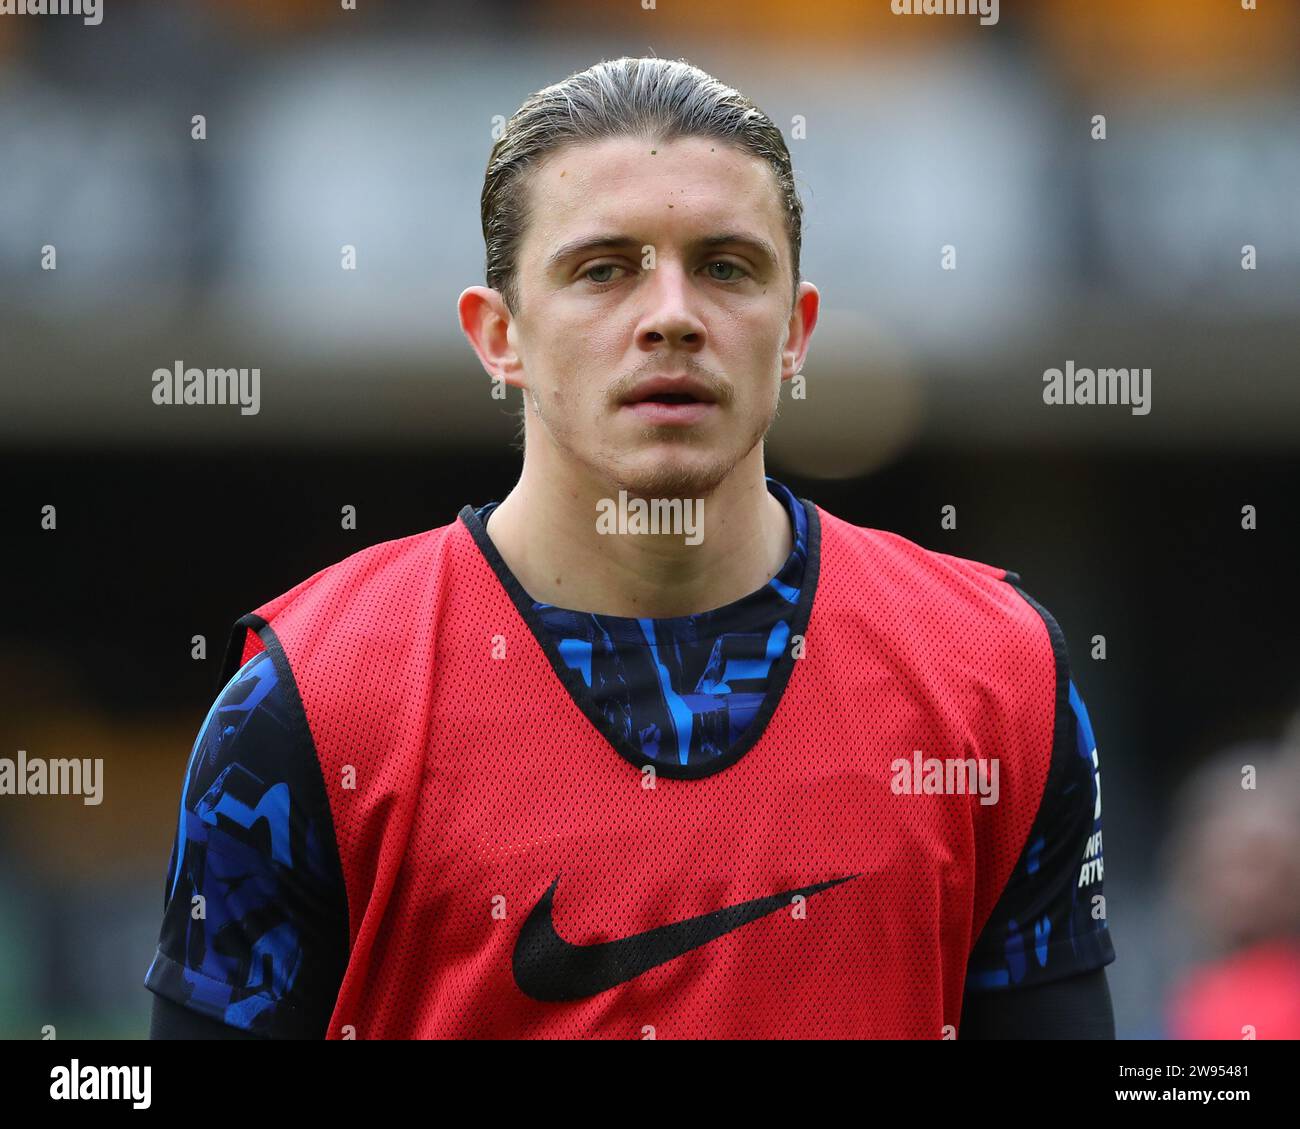 Wolverhampton, UK. 24th Dec, 2023. Conor Gallagher of Chelsea warms up ahead of the match, during the Premier League match Wolverhampton Wanderers vs Chelsea at Molineux, Wolverhampton, United Kingdom, 24th December 2023 (Photo by Gareth Evans/News Images) Credit: News Images LTD/Alamy Live News Stock Photo